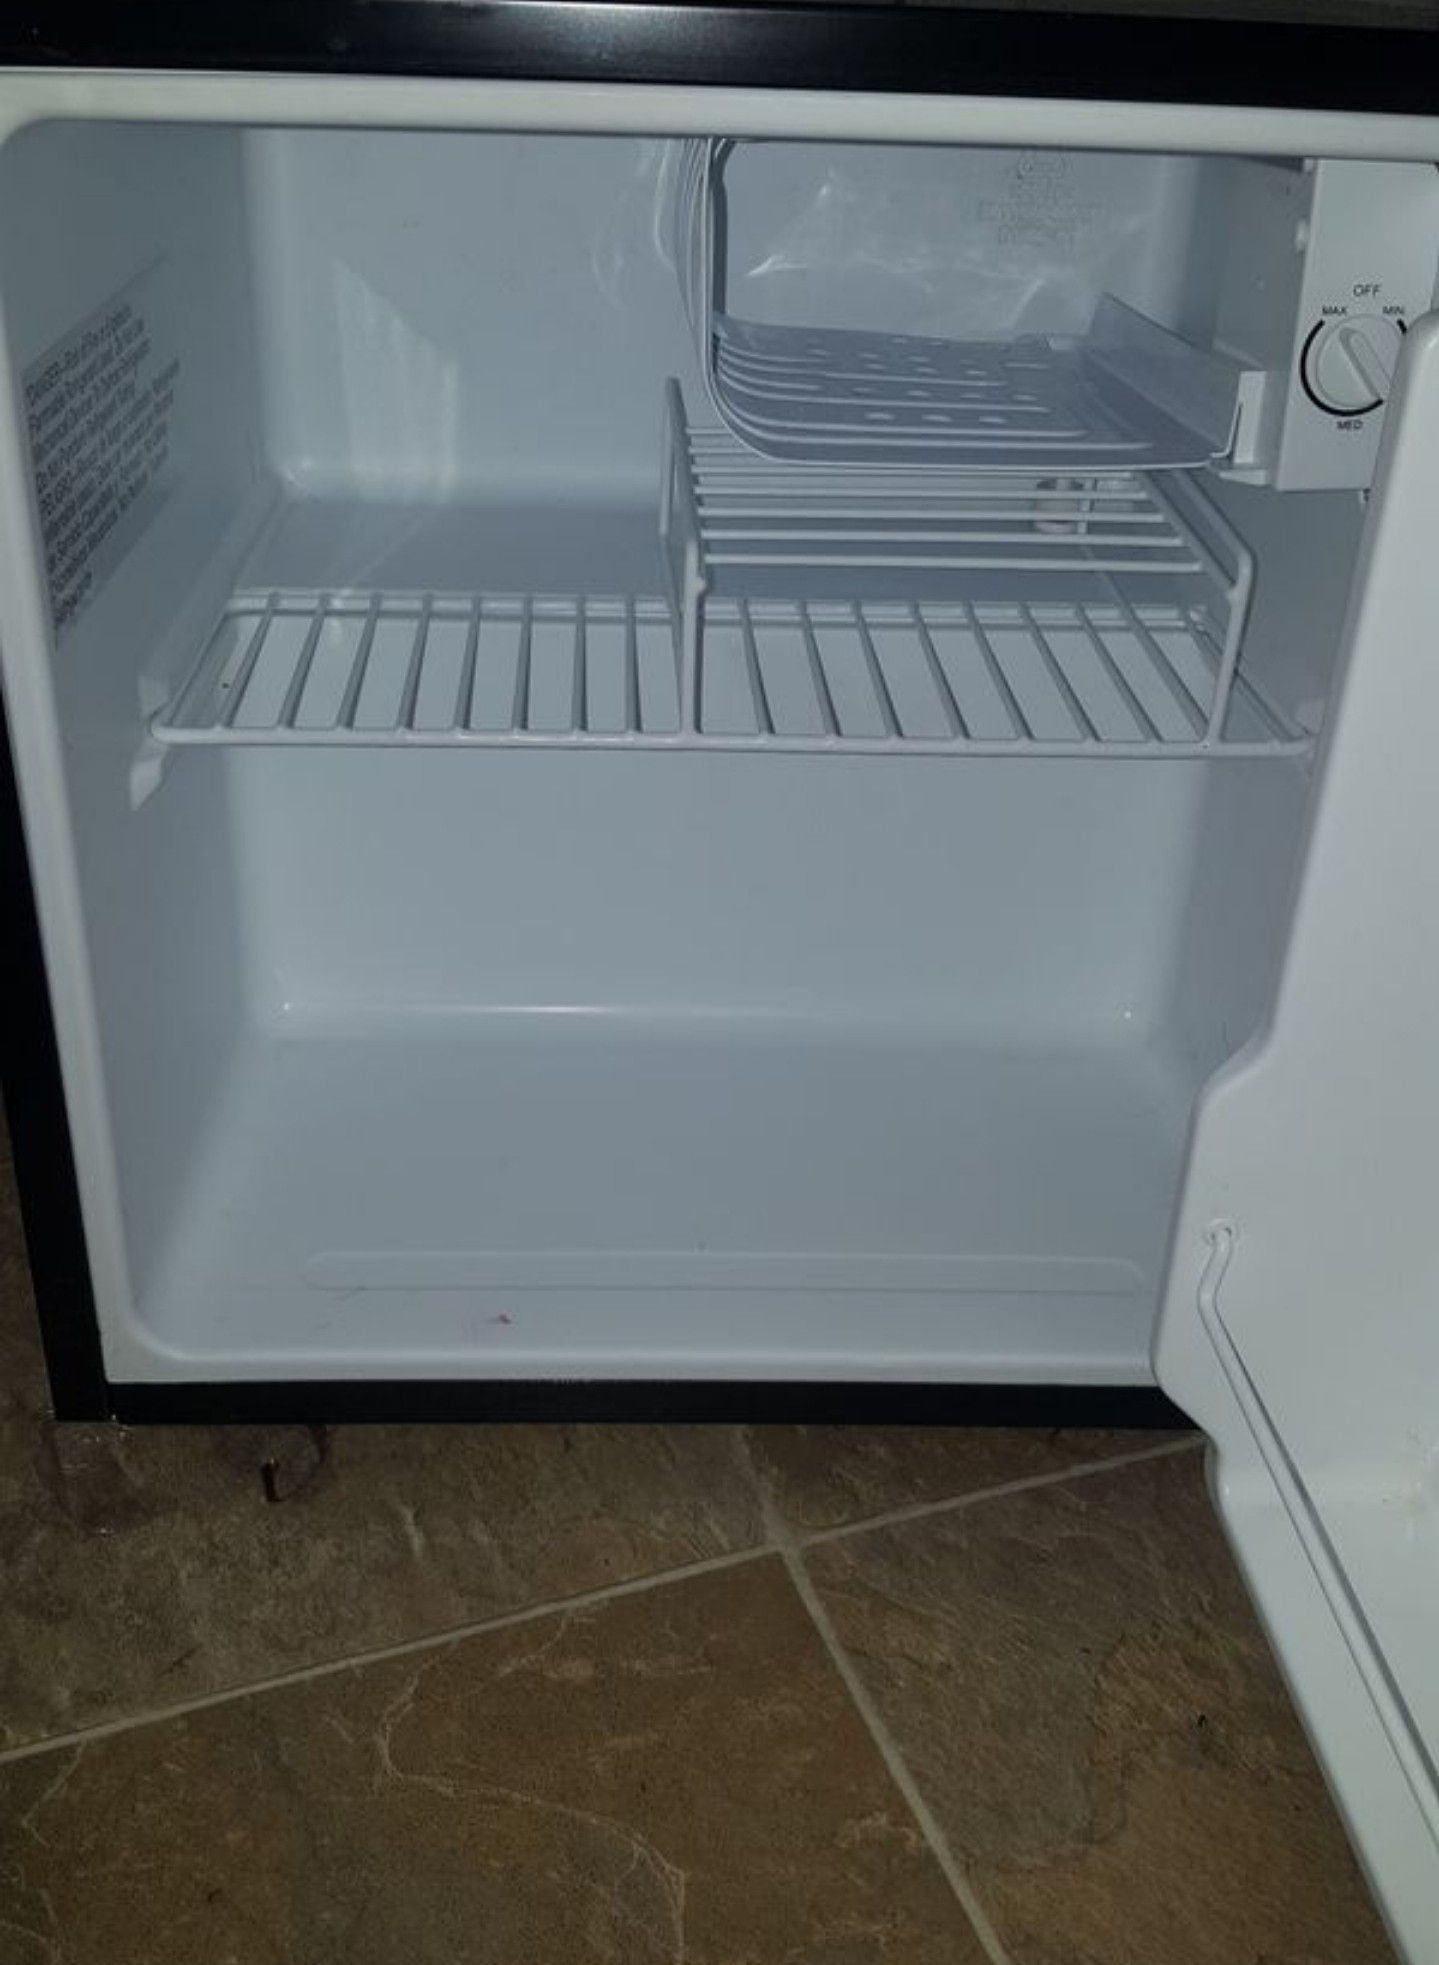 $60 OBO. Mini Fridge 3 months old since I bought it brand new.